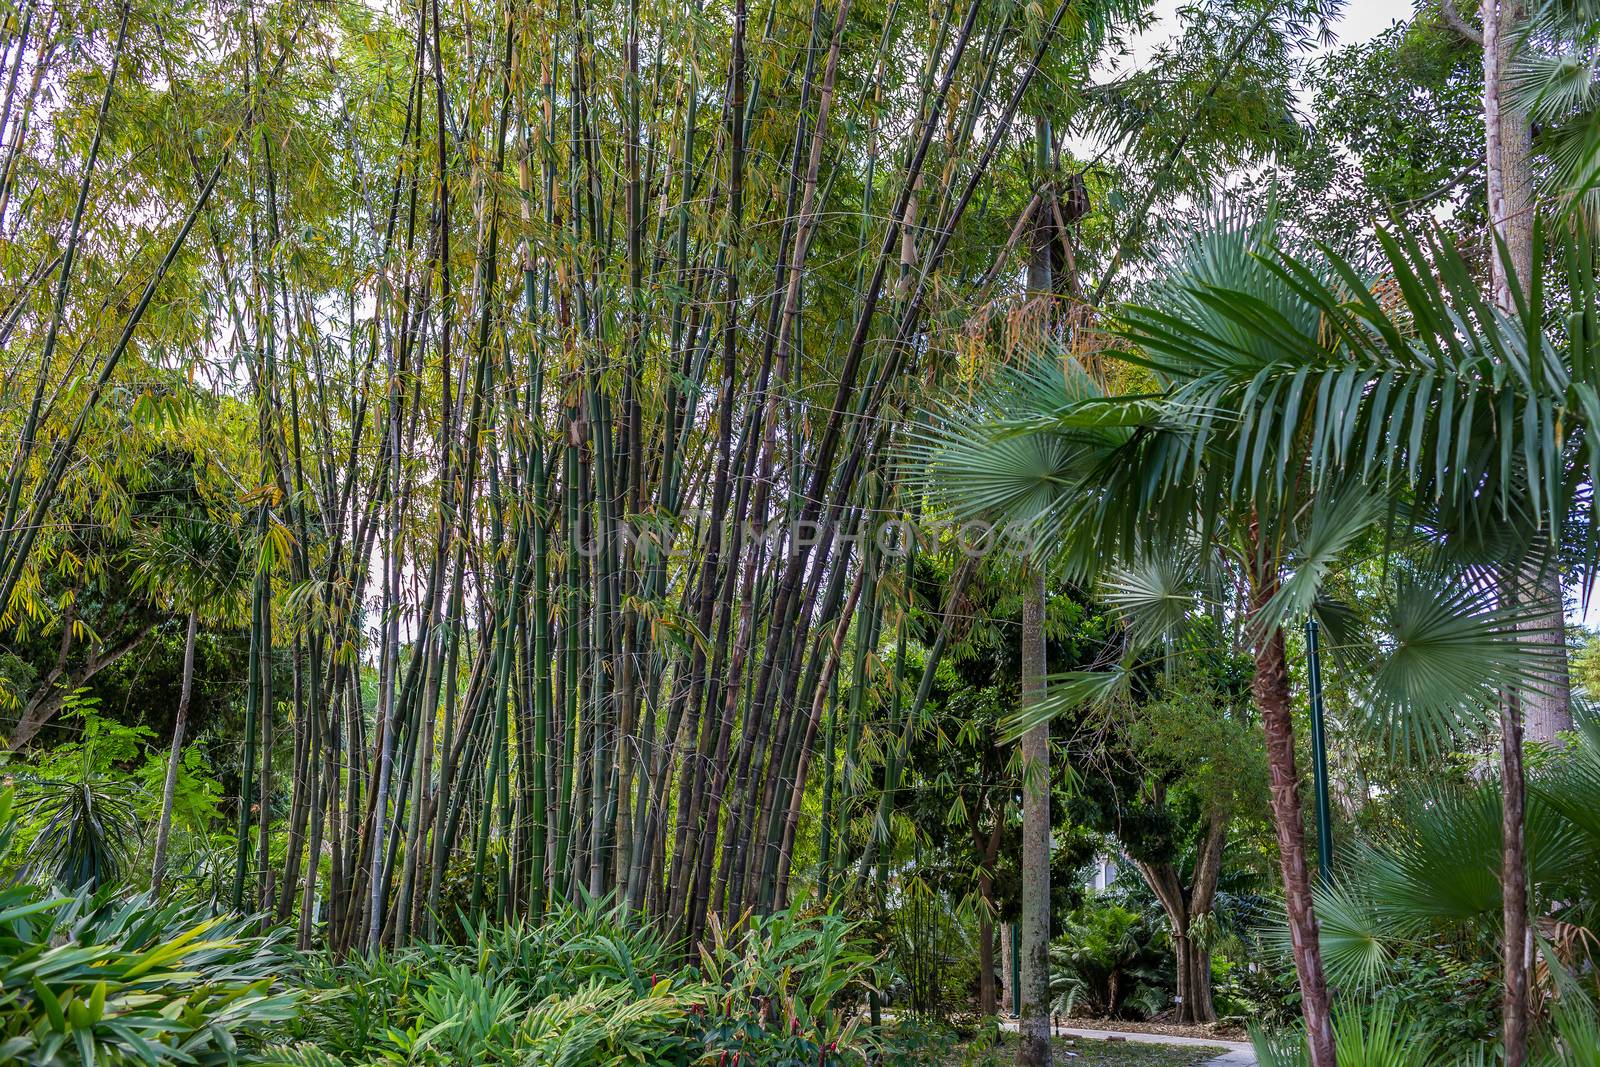 A stand of bamboo growing in south Florida.